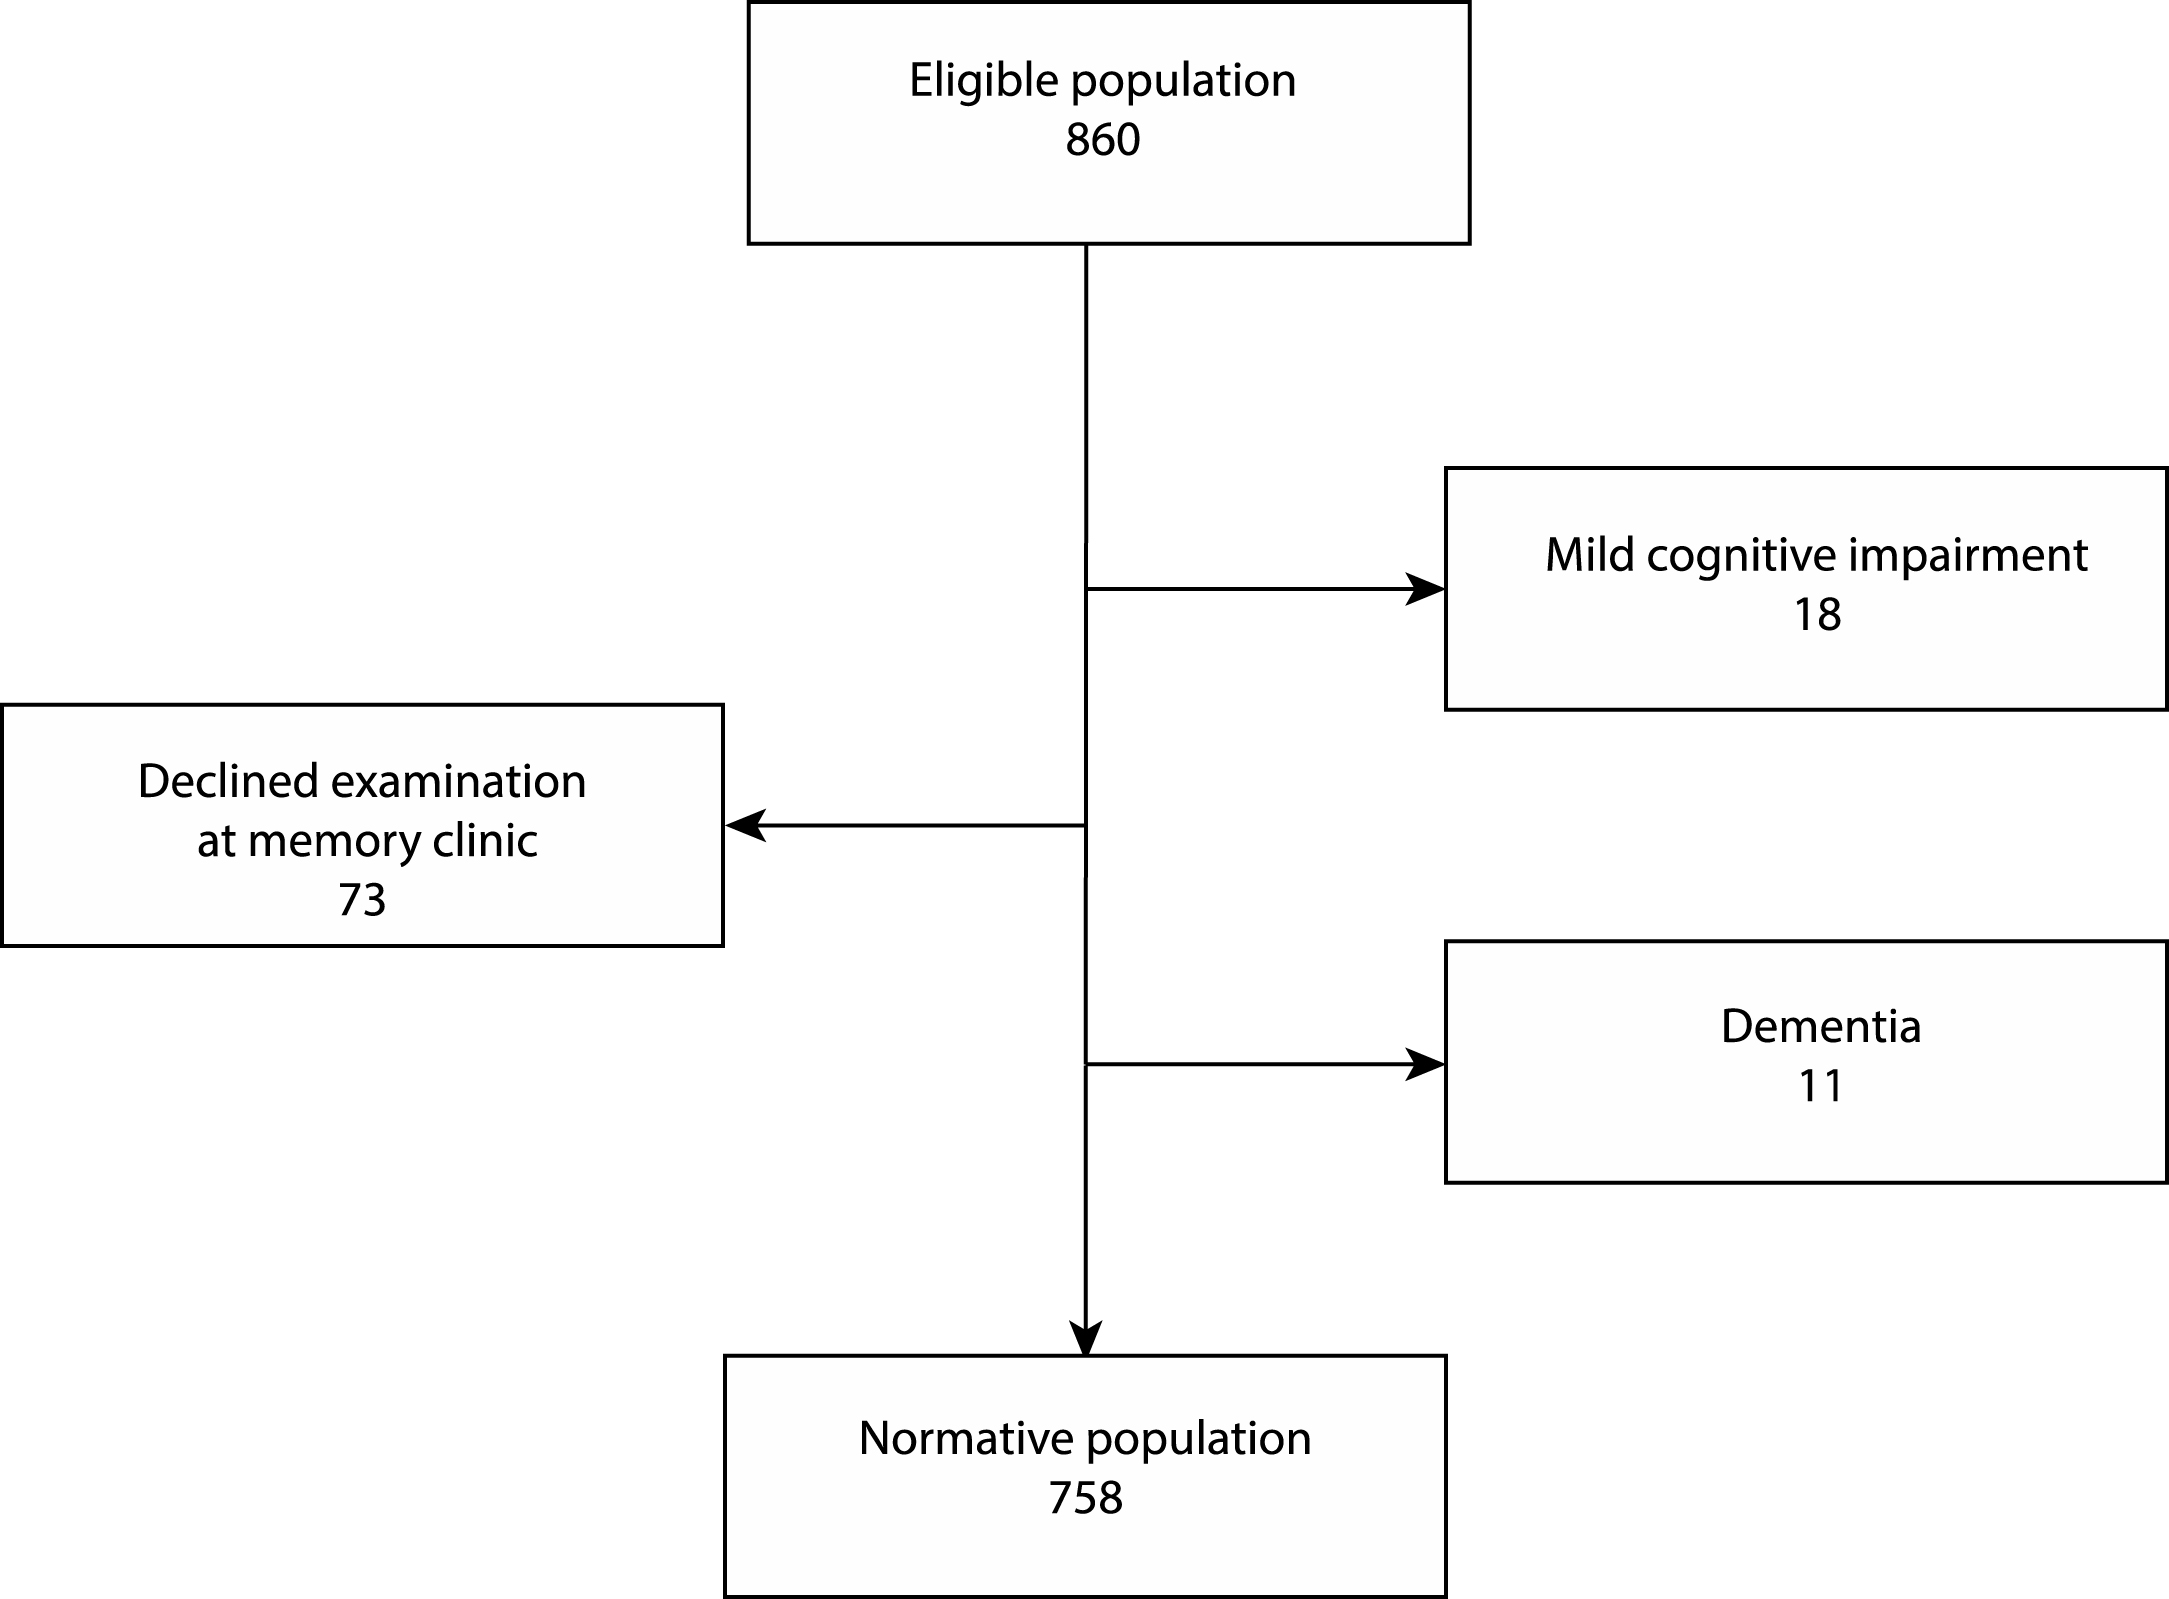 Flow chart of the enrollment process. 860 people completed MoCA together with MMSE and AQT. 133 participants scored <24 on MMSE, >90 on AQT or reported symptoms of cognitive impairment, and were summoned for a clinical investigation at the memory clinic. 31 of these 133 people were assessed as cognitively healthy and re-entered into the normative population and 102 were excluded according to the flowchart.